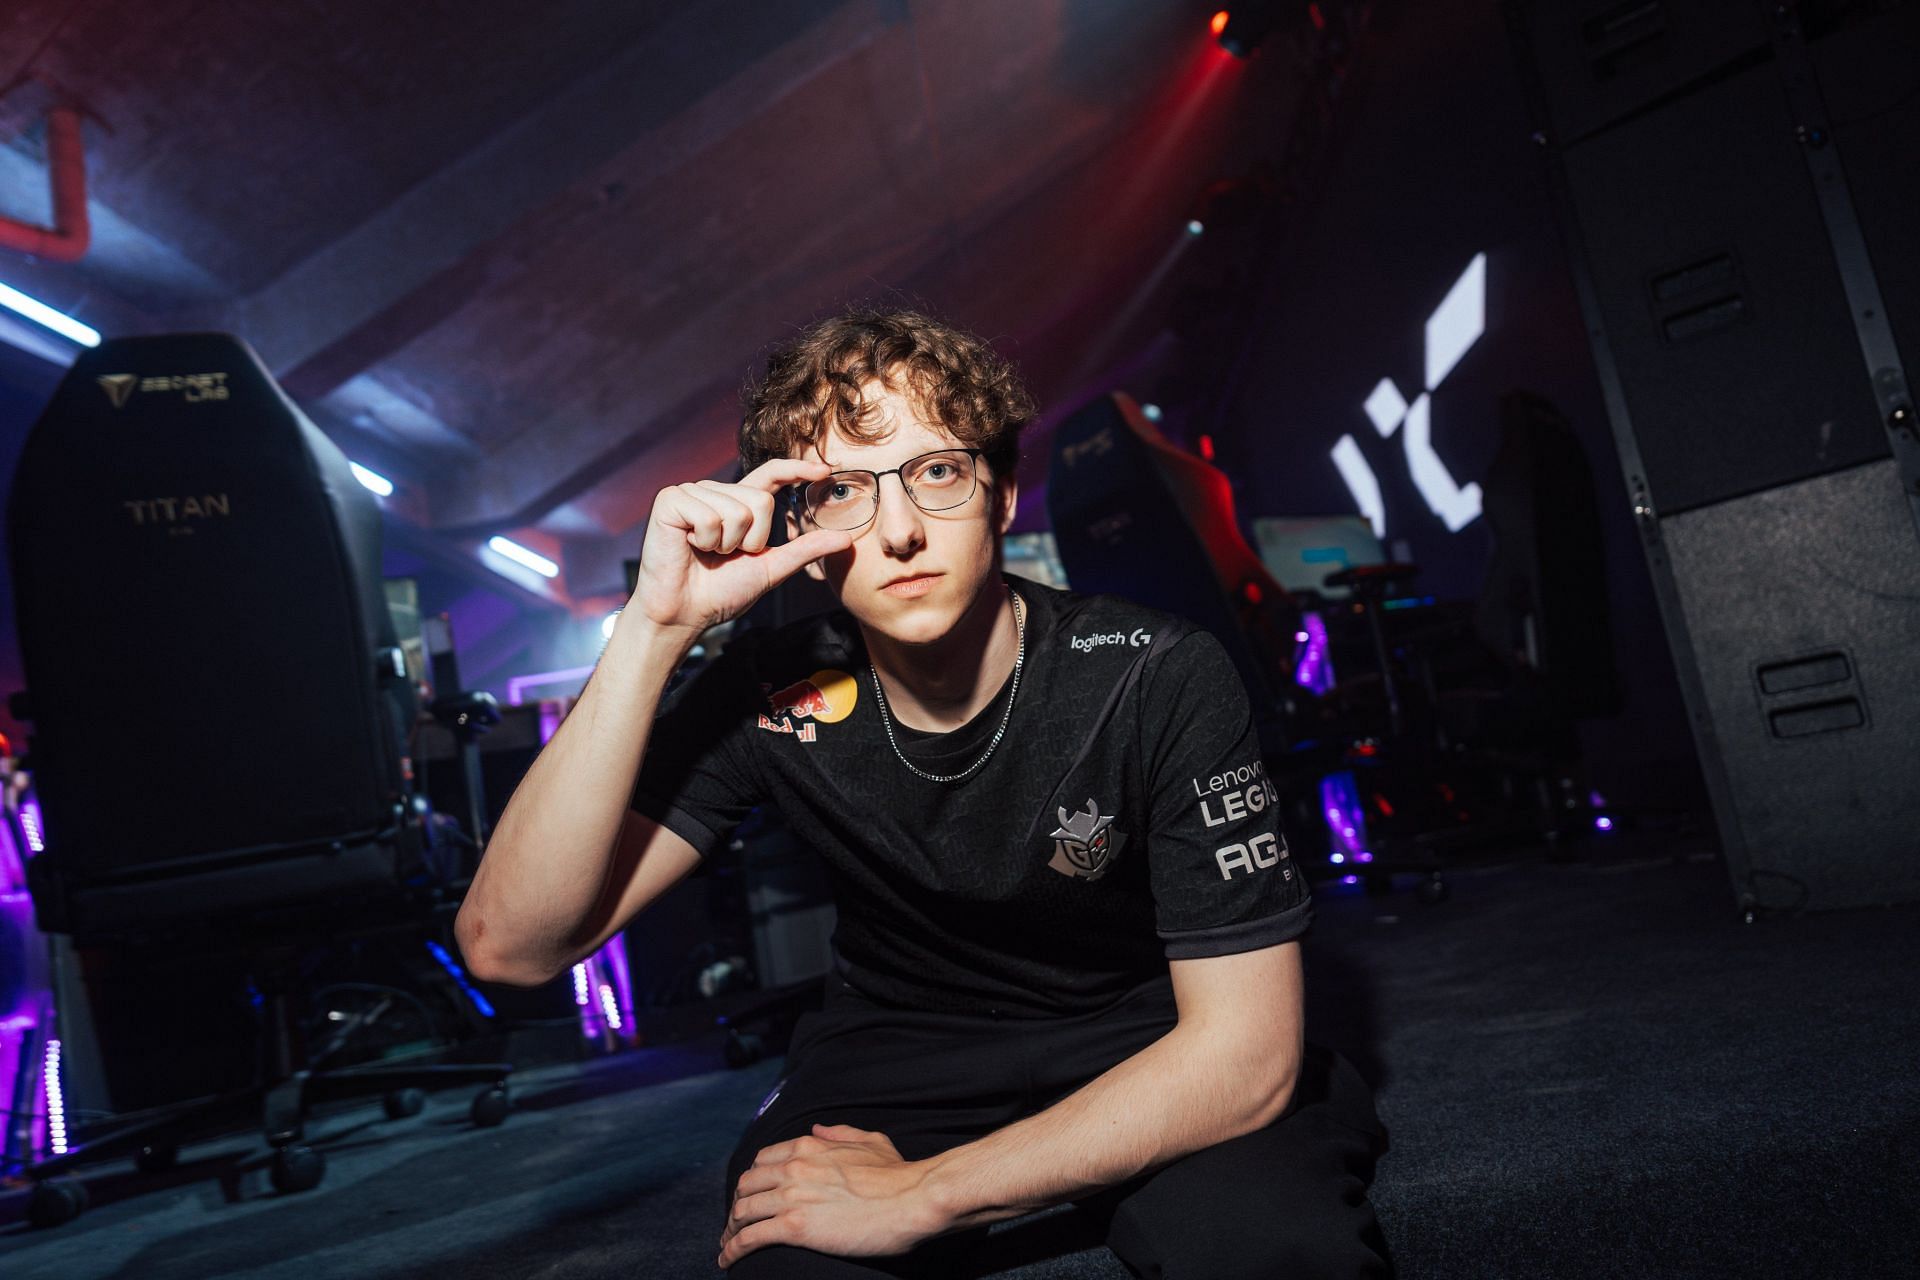 icy at VCT Masters Shanghai (Image via Riot Games)